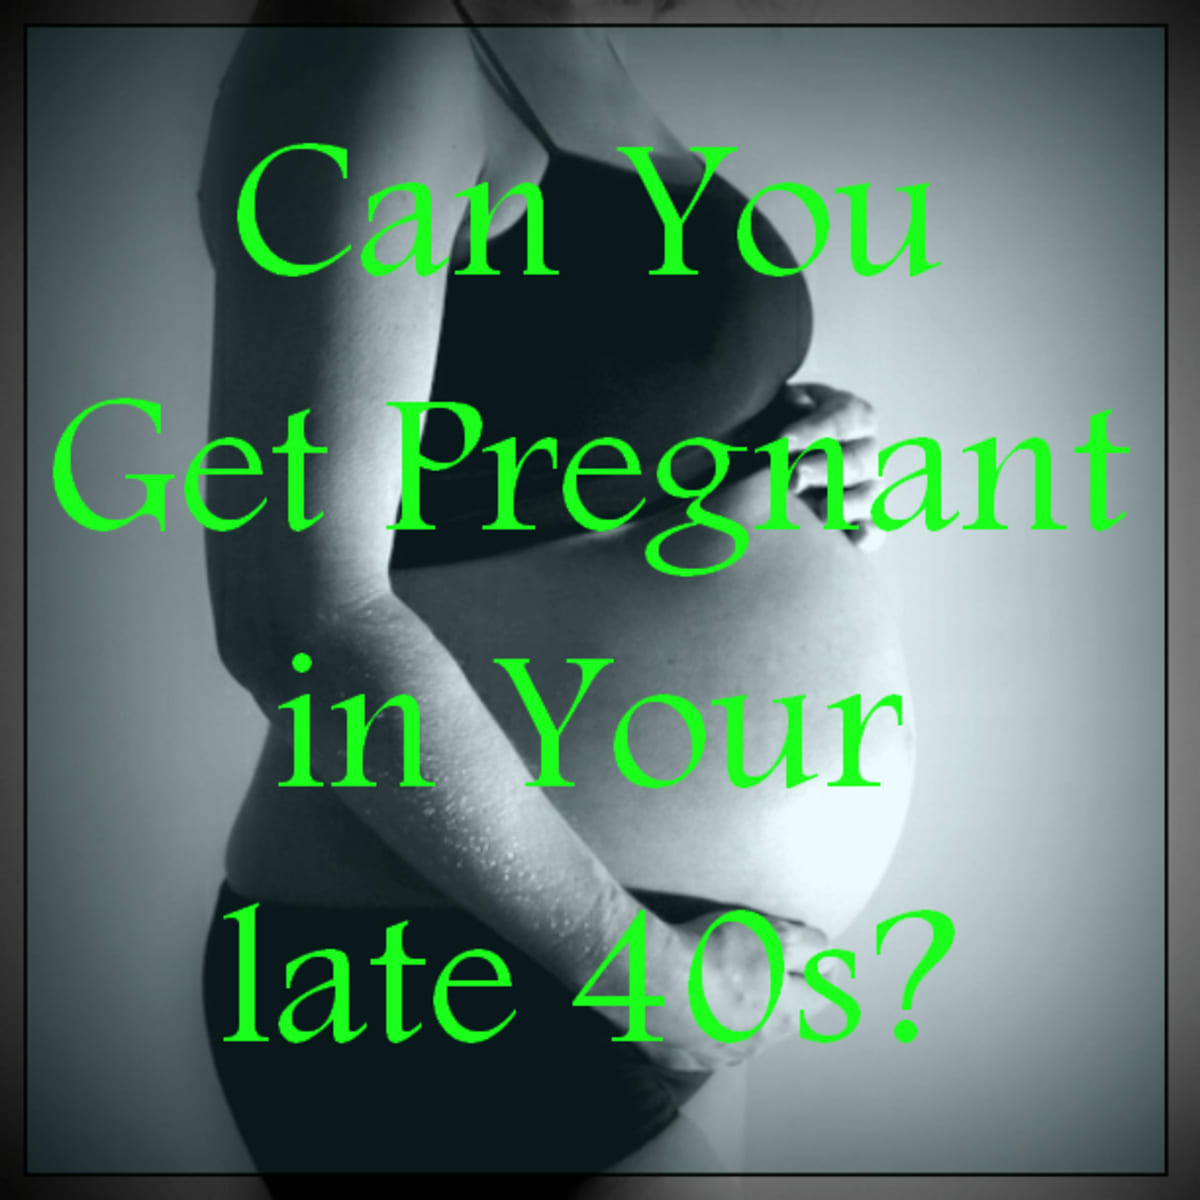 Pregnant at 47: Can I do that? 